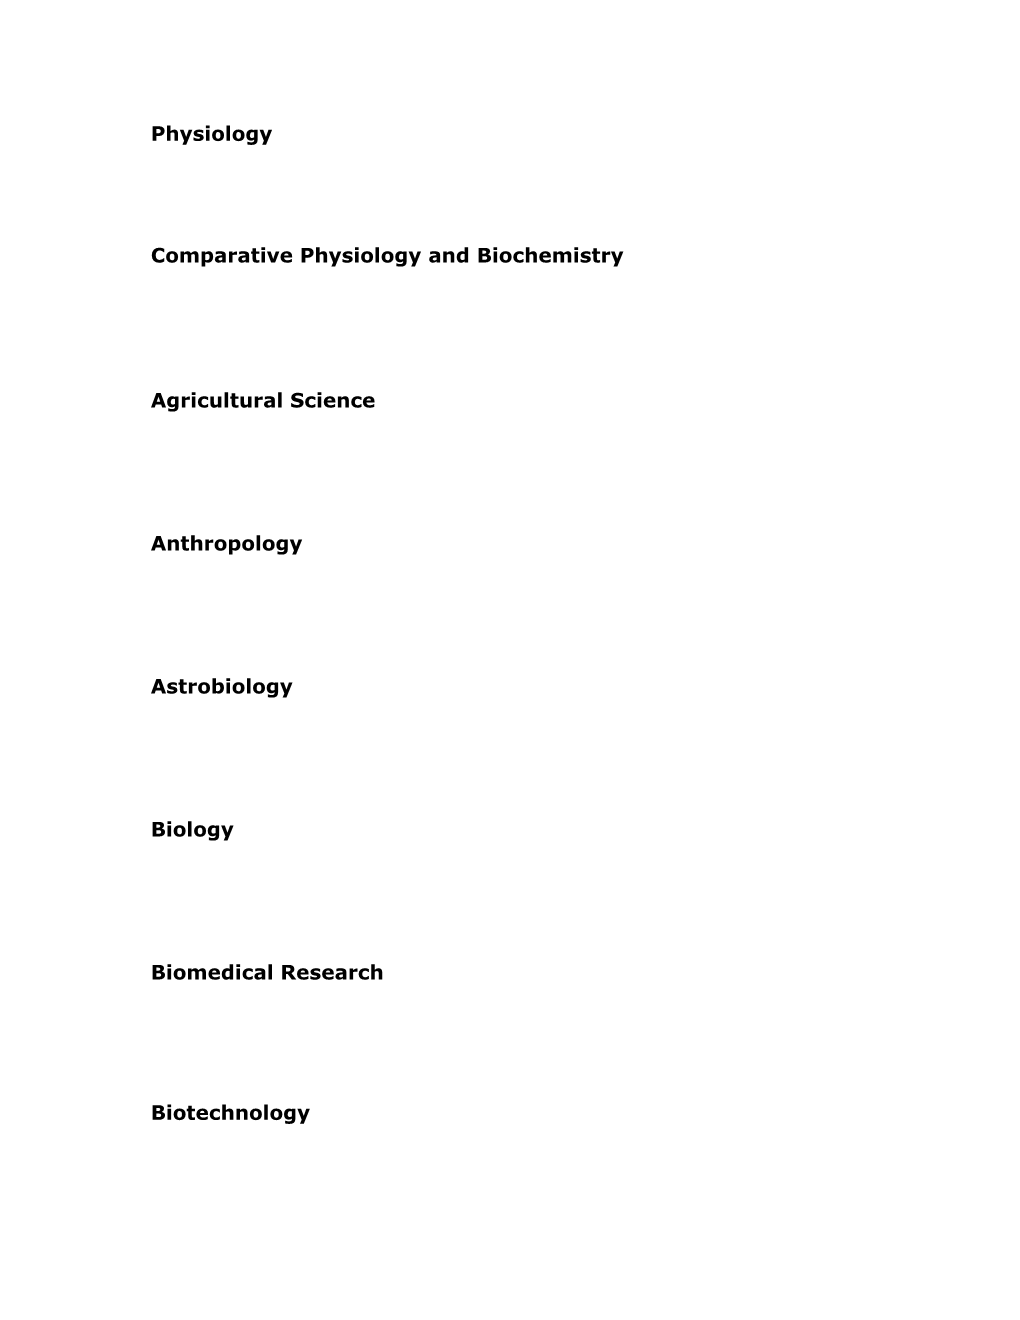 Comparative Physiology and Biochemistry